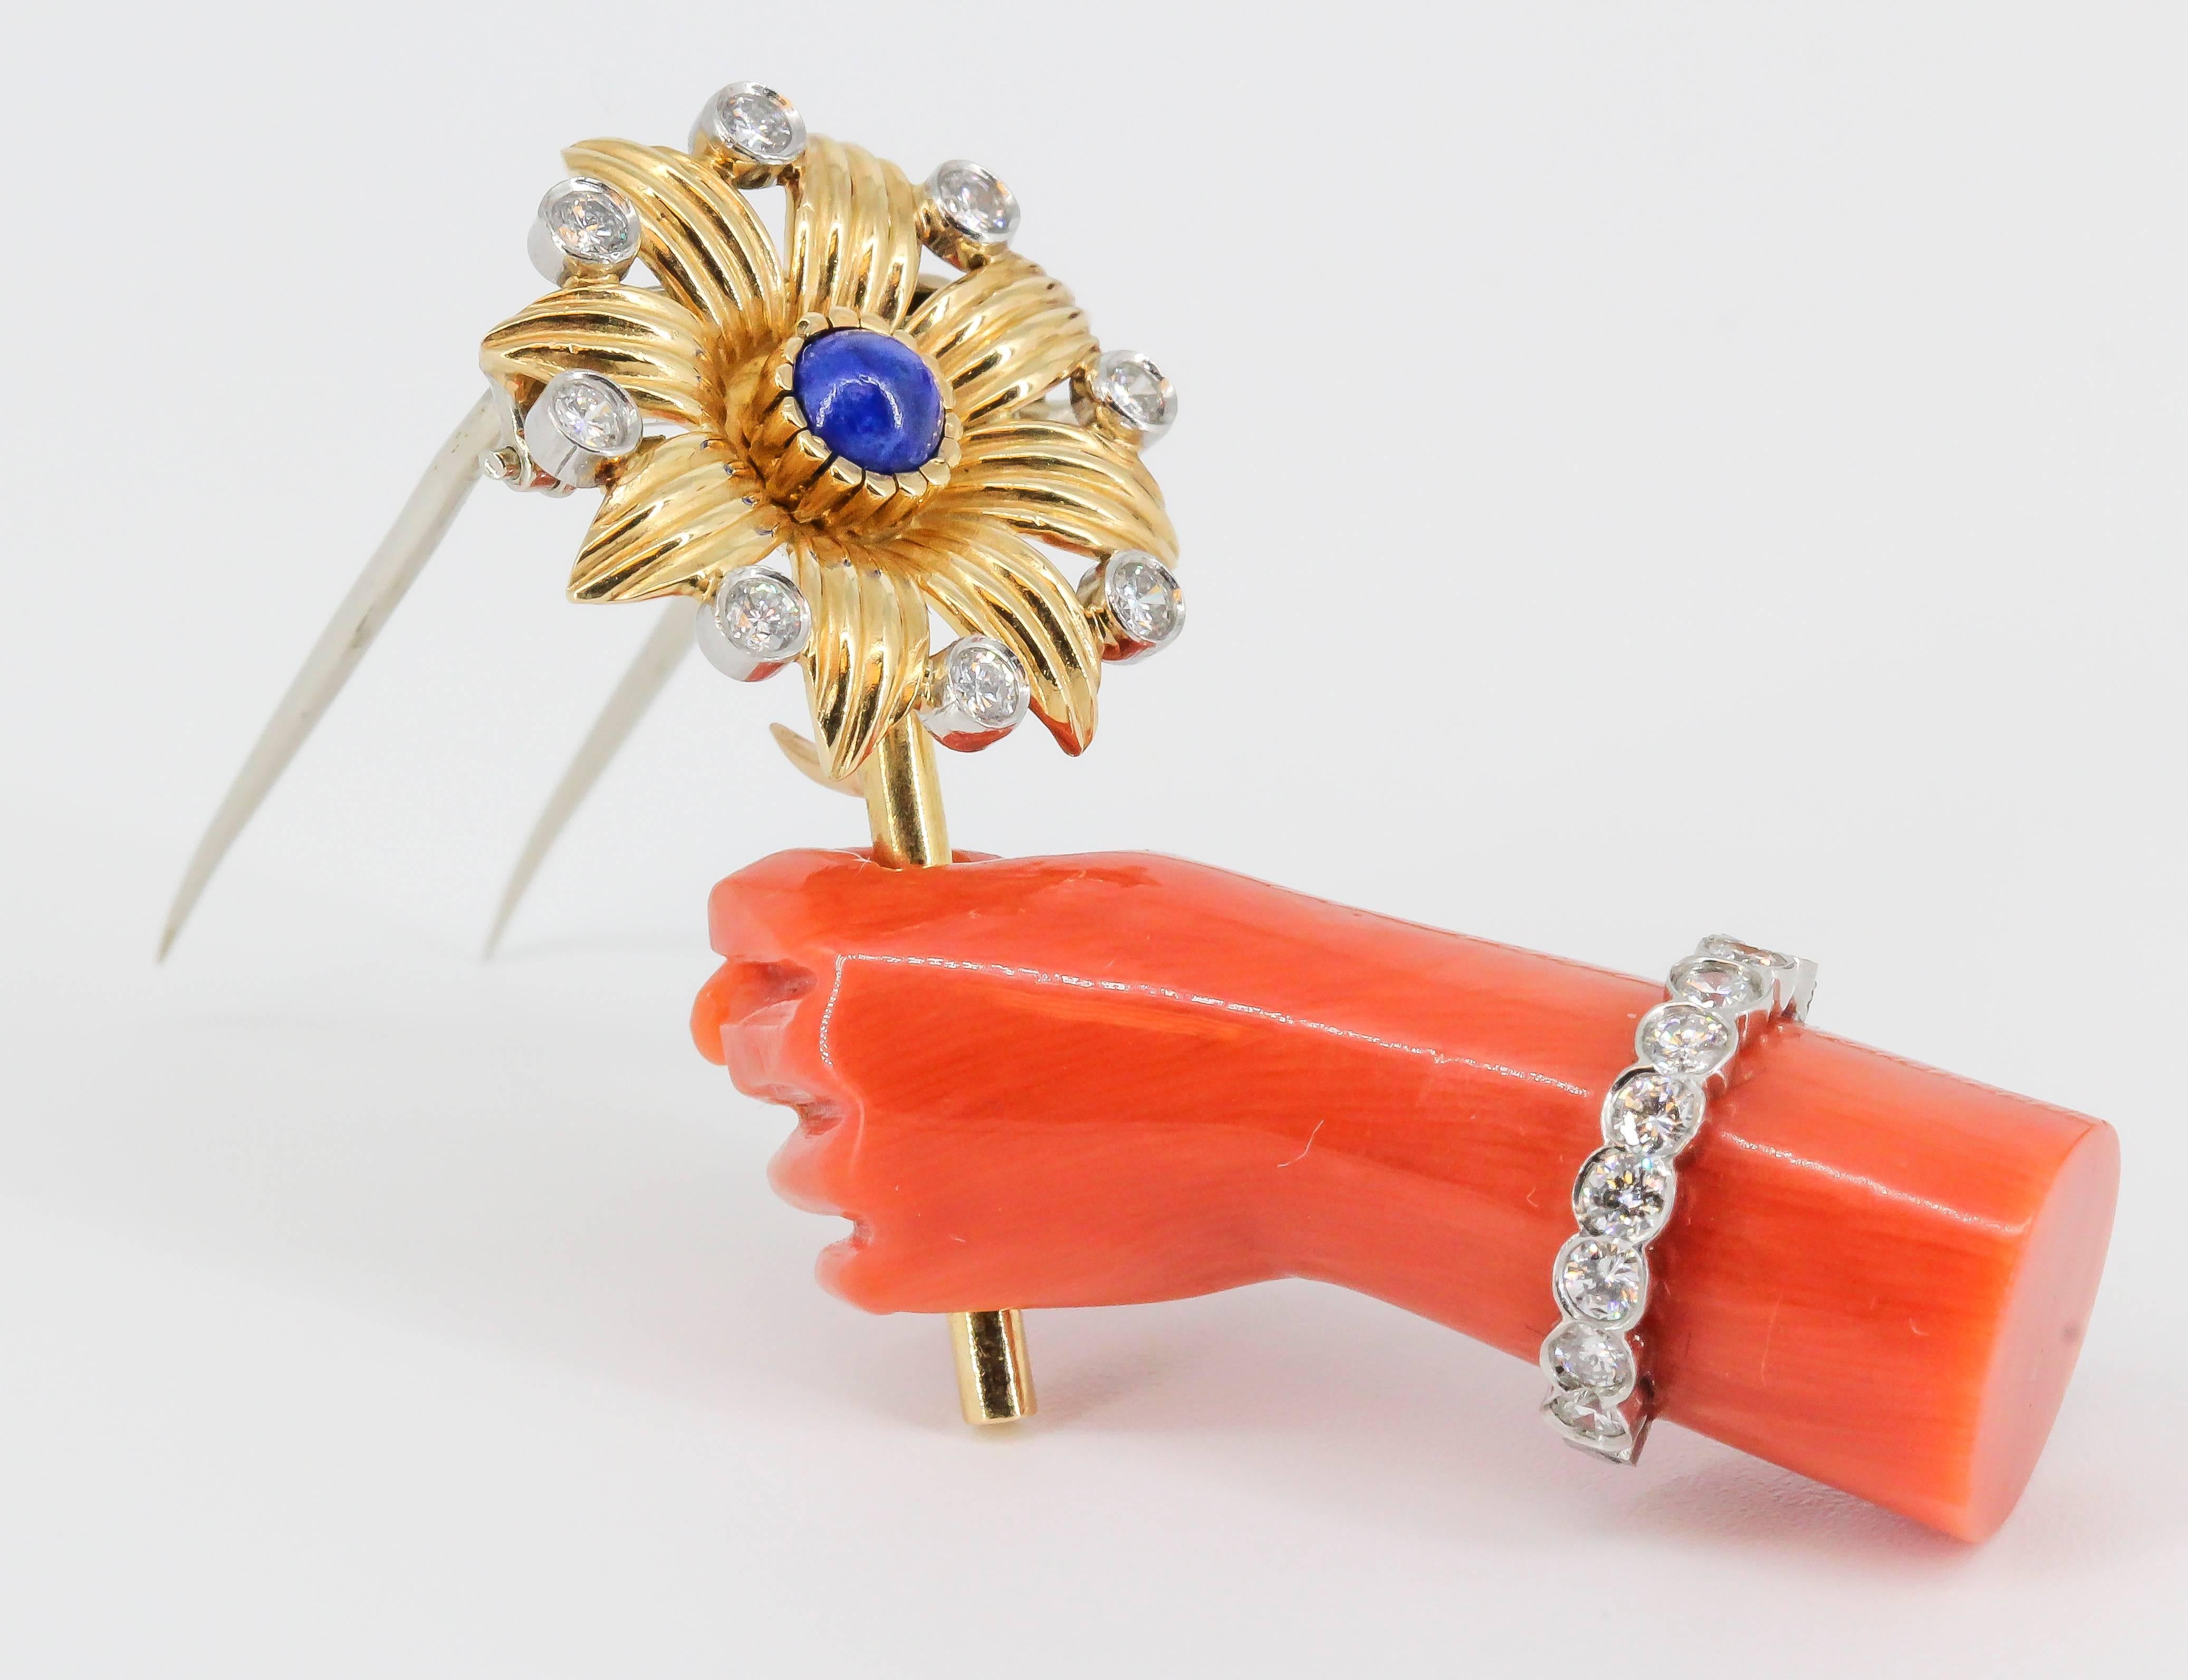 Rare lapis, diamond, platinum, coral and 18K yellow gold brooch by Cartier, of French origin circa 1960s. It resembles a hand holding a flower. The hand is made of rich coral, with high grade round brilliant cut diamonds around it as a bracelet; the